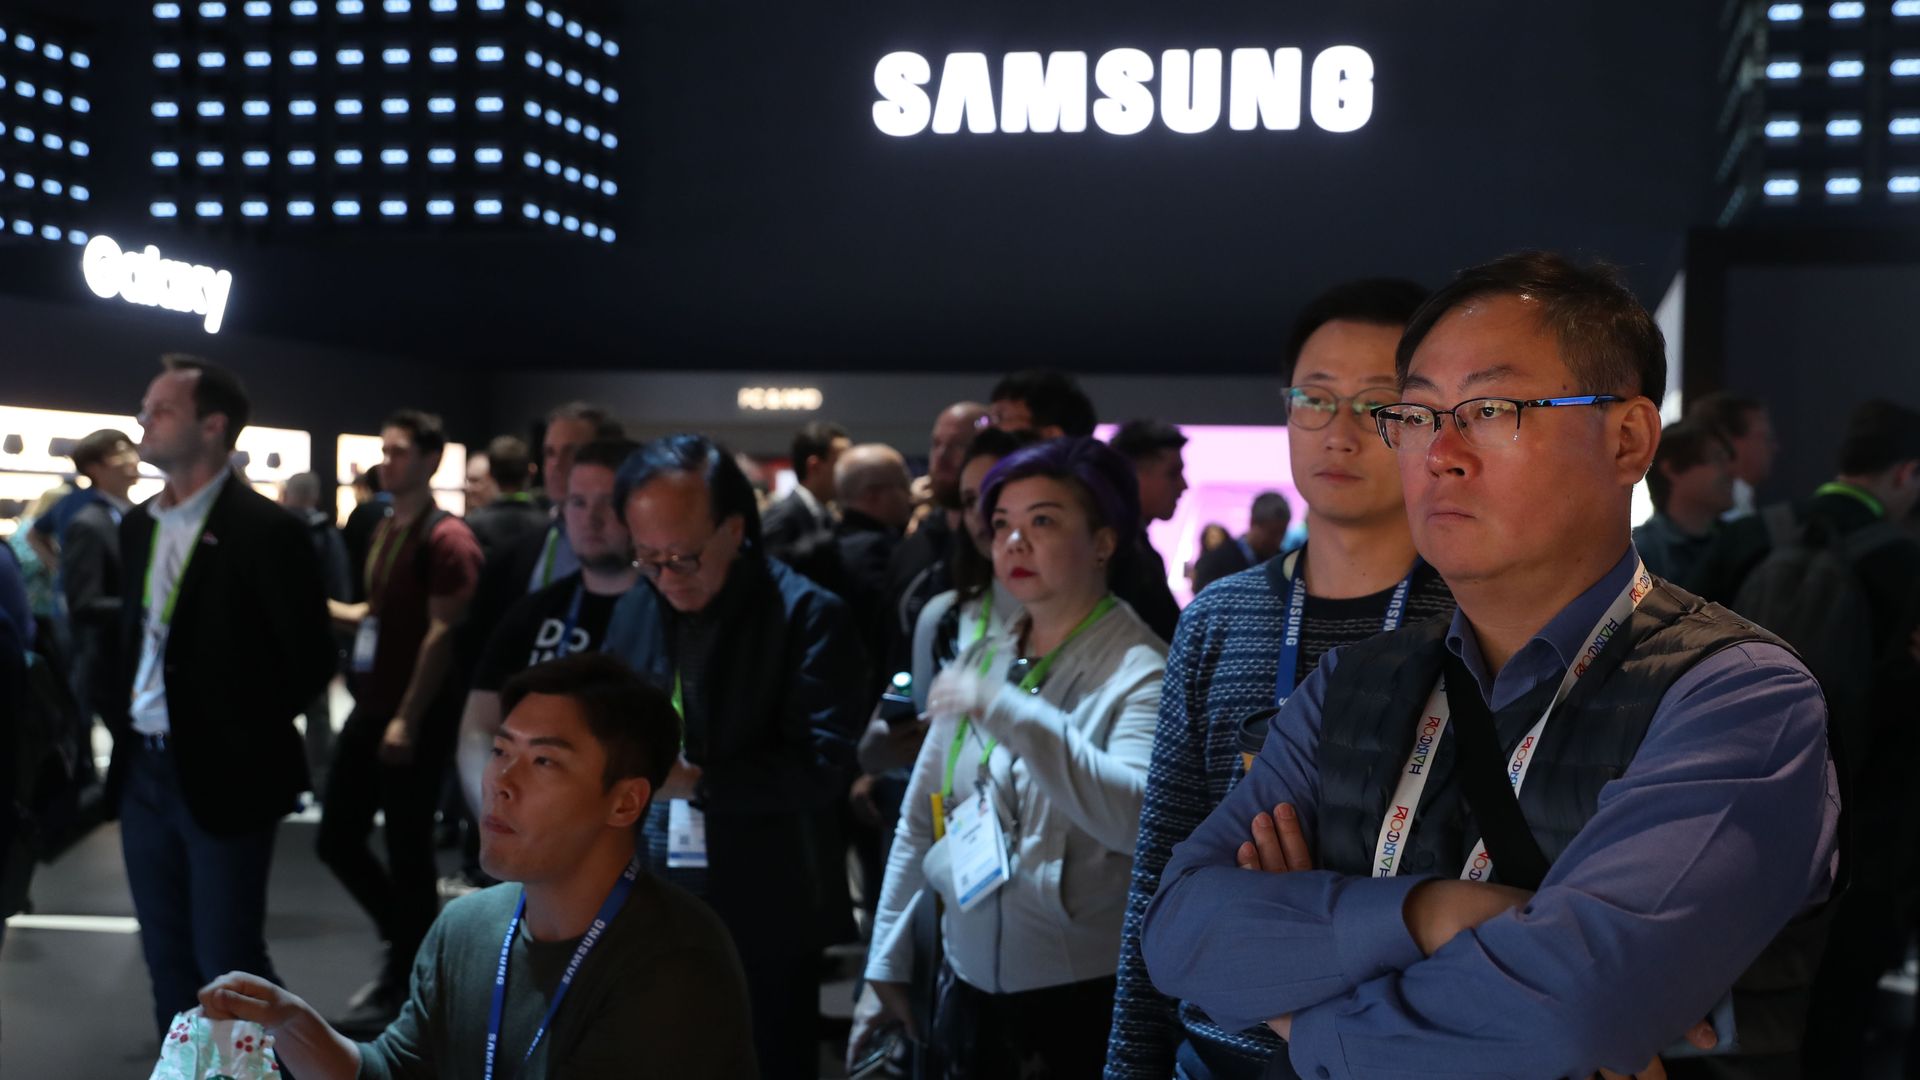 Attendees watch a presentation at the Samsung booth during a technology conference in 2019.